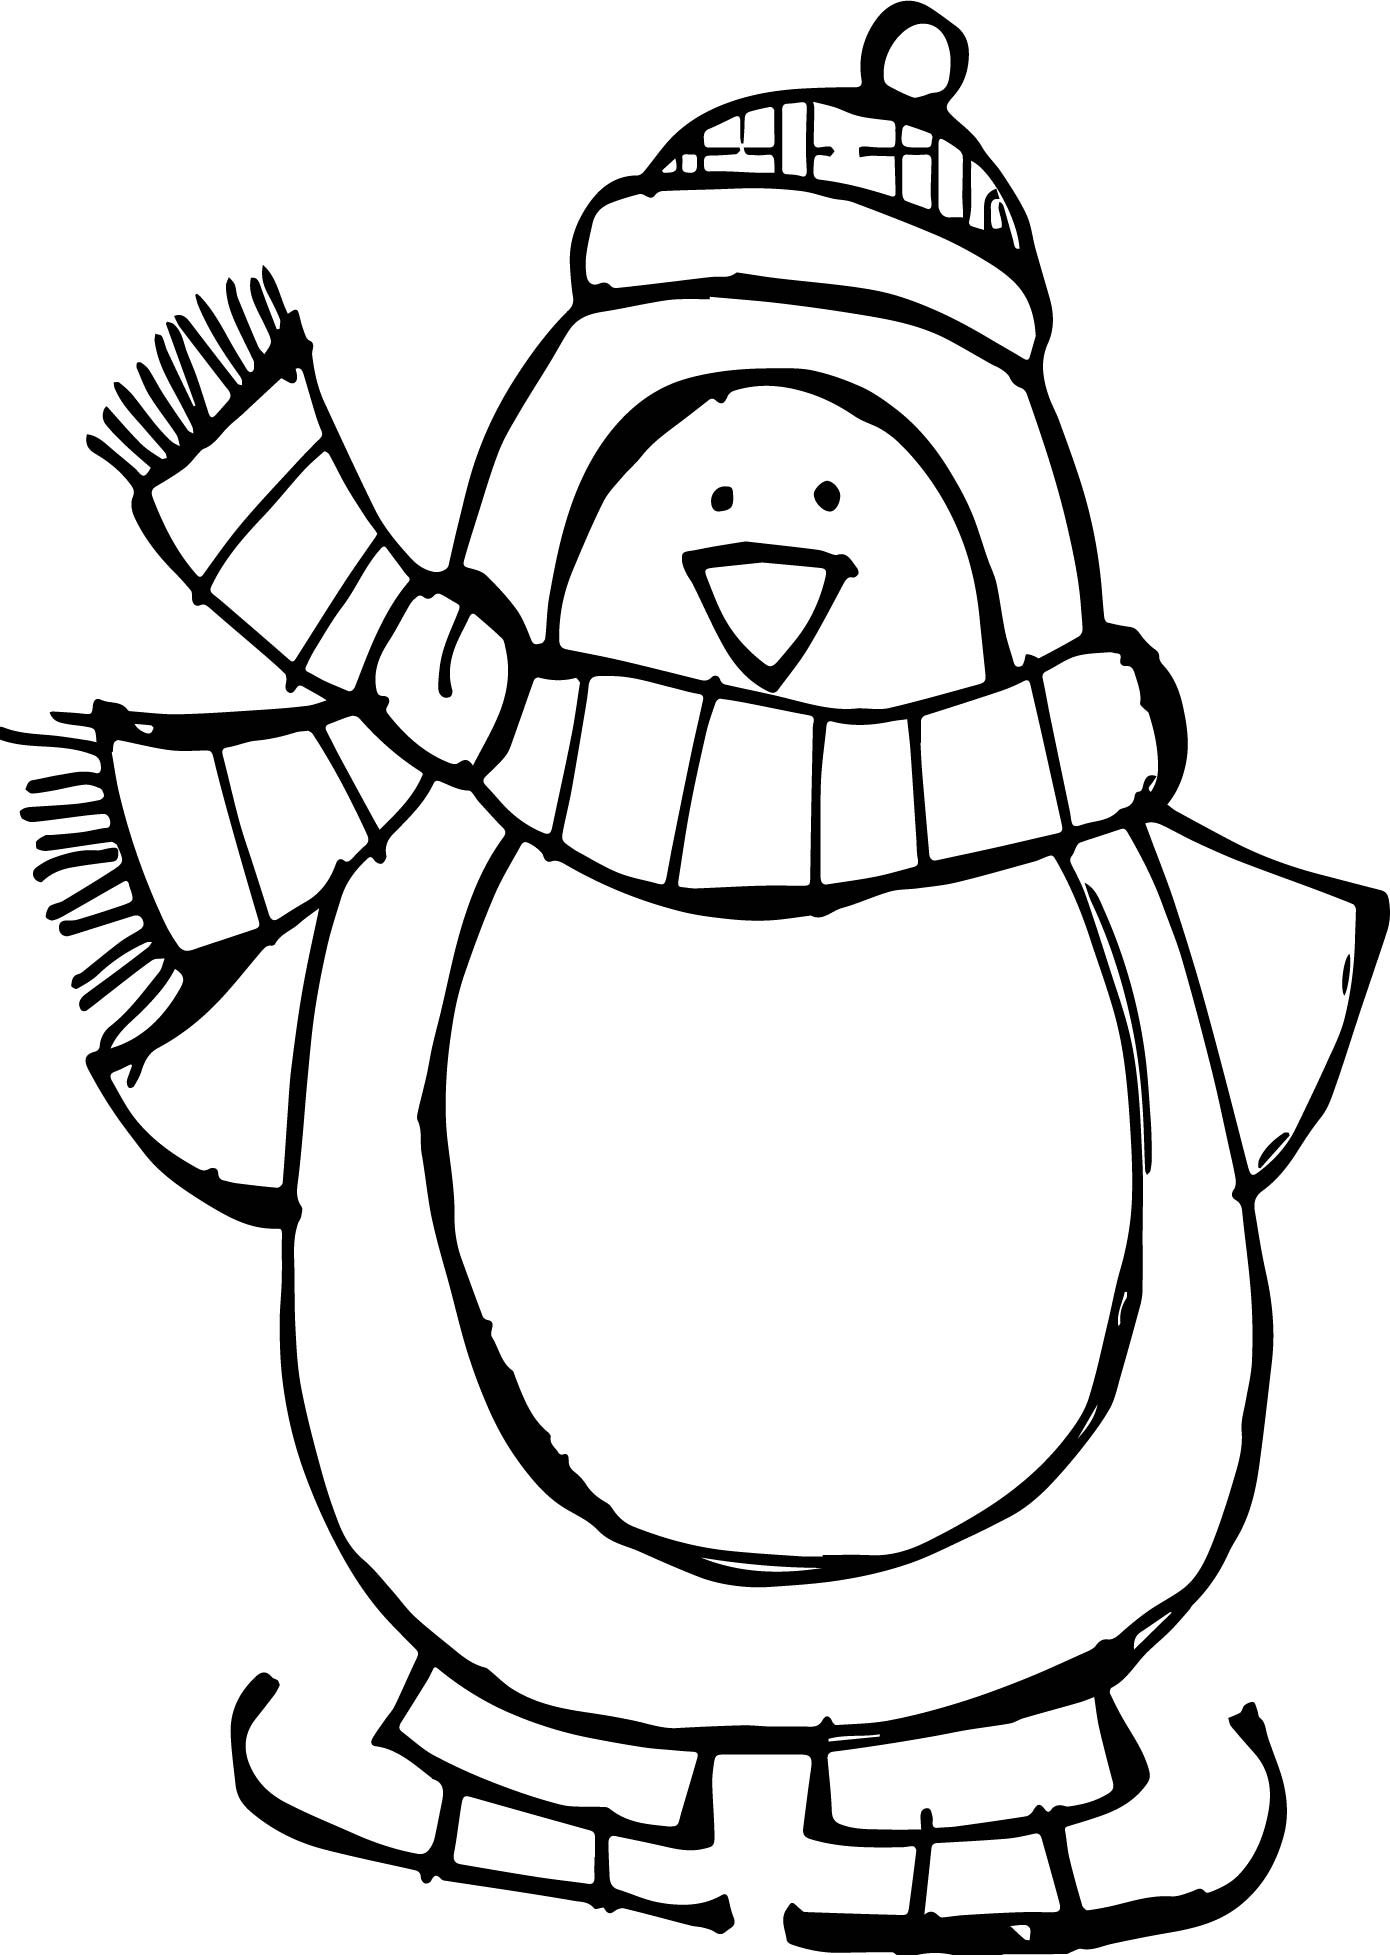 Baby Penguin Coloring Pages at GetColoringscom Free